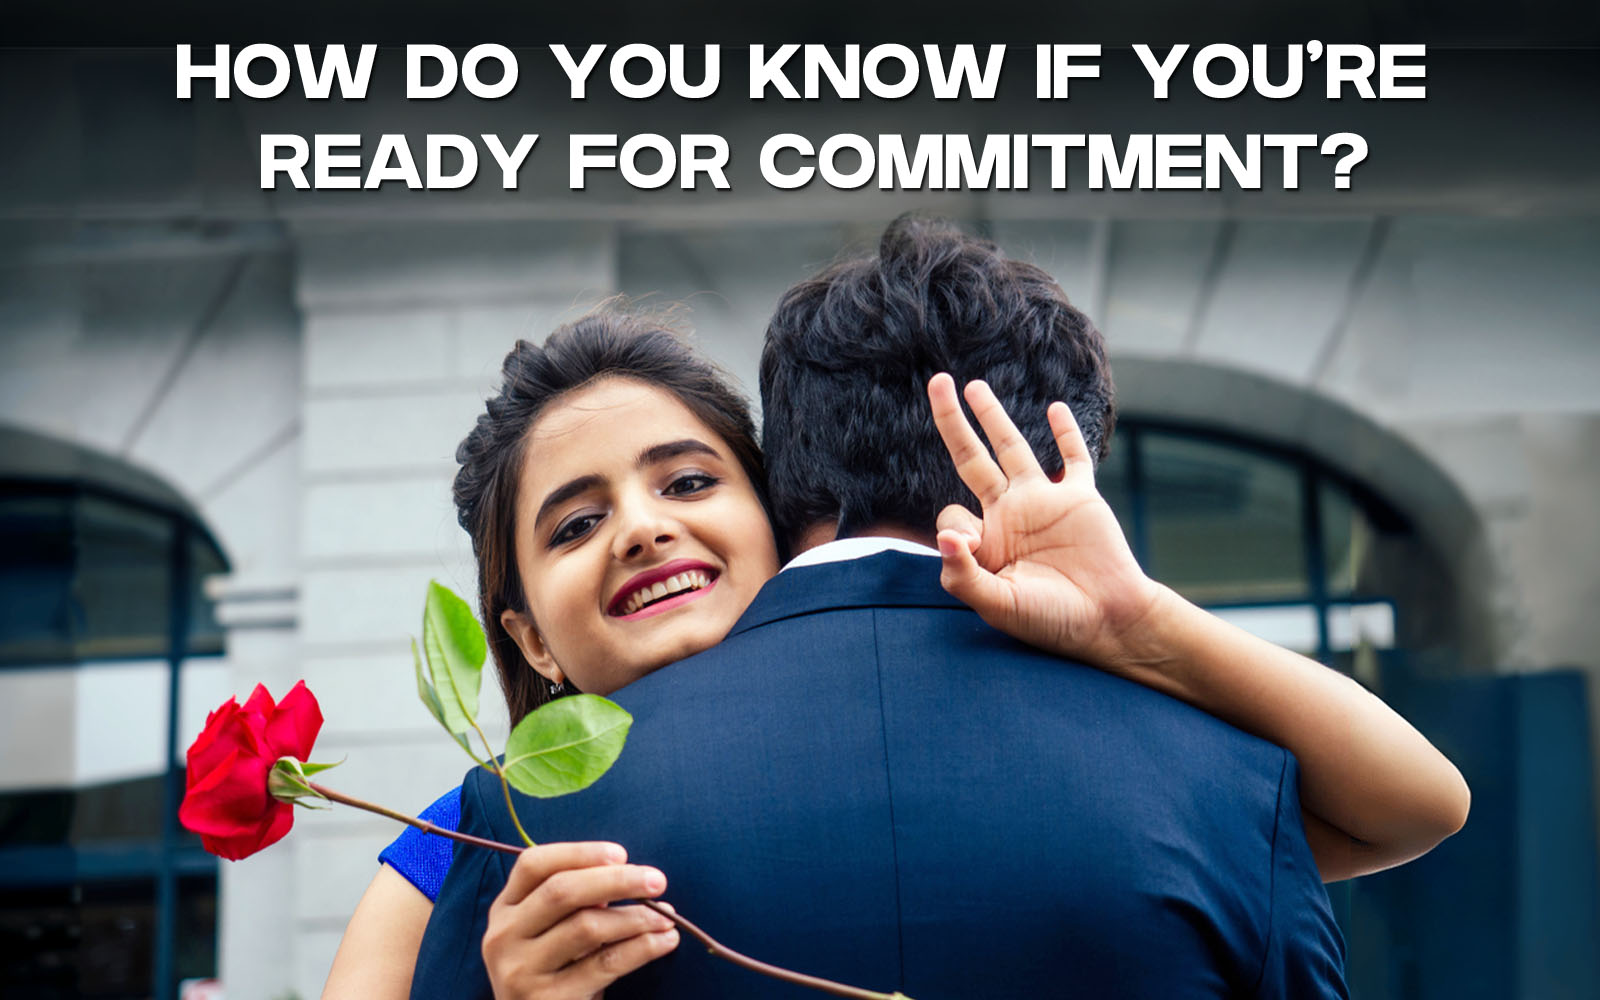 How do you know if you're ready for commitment?